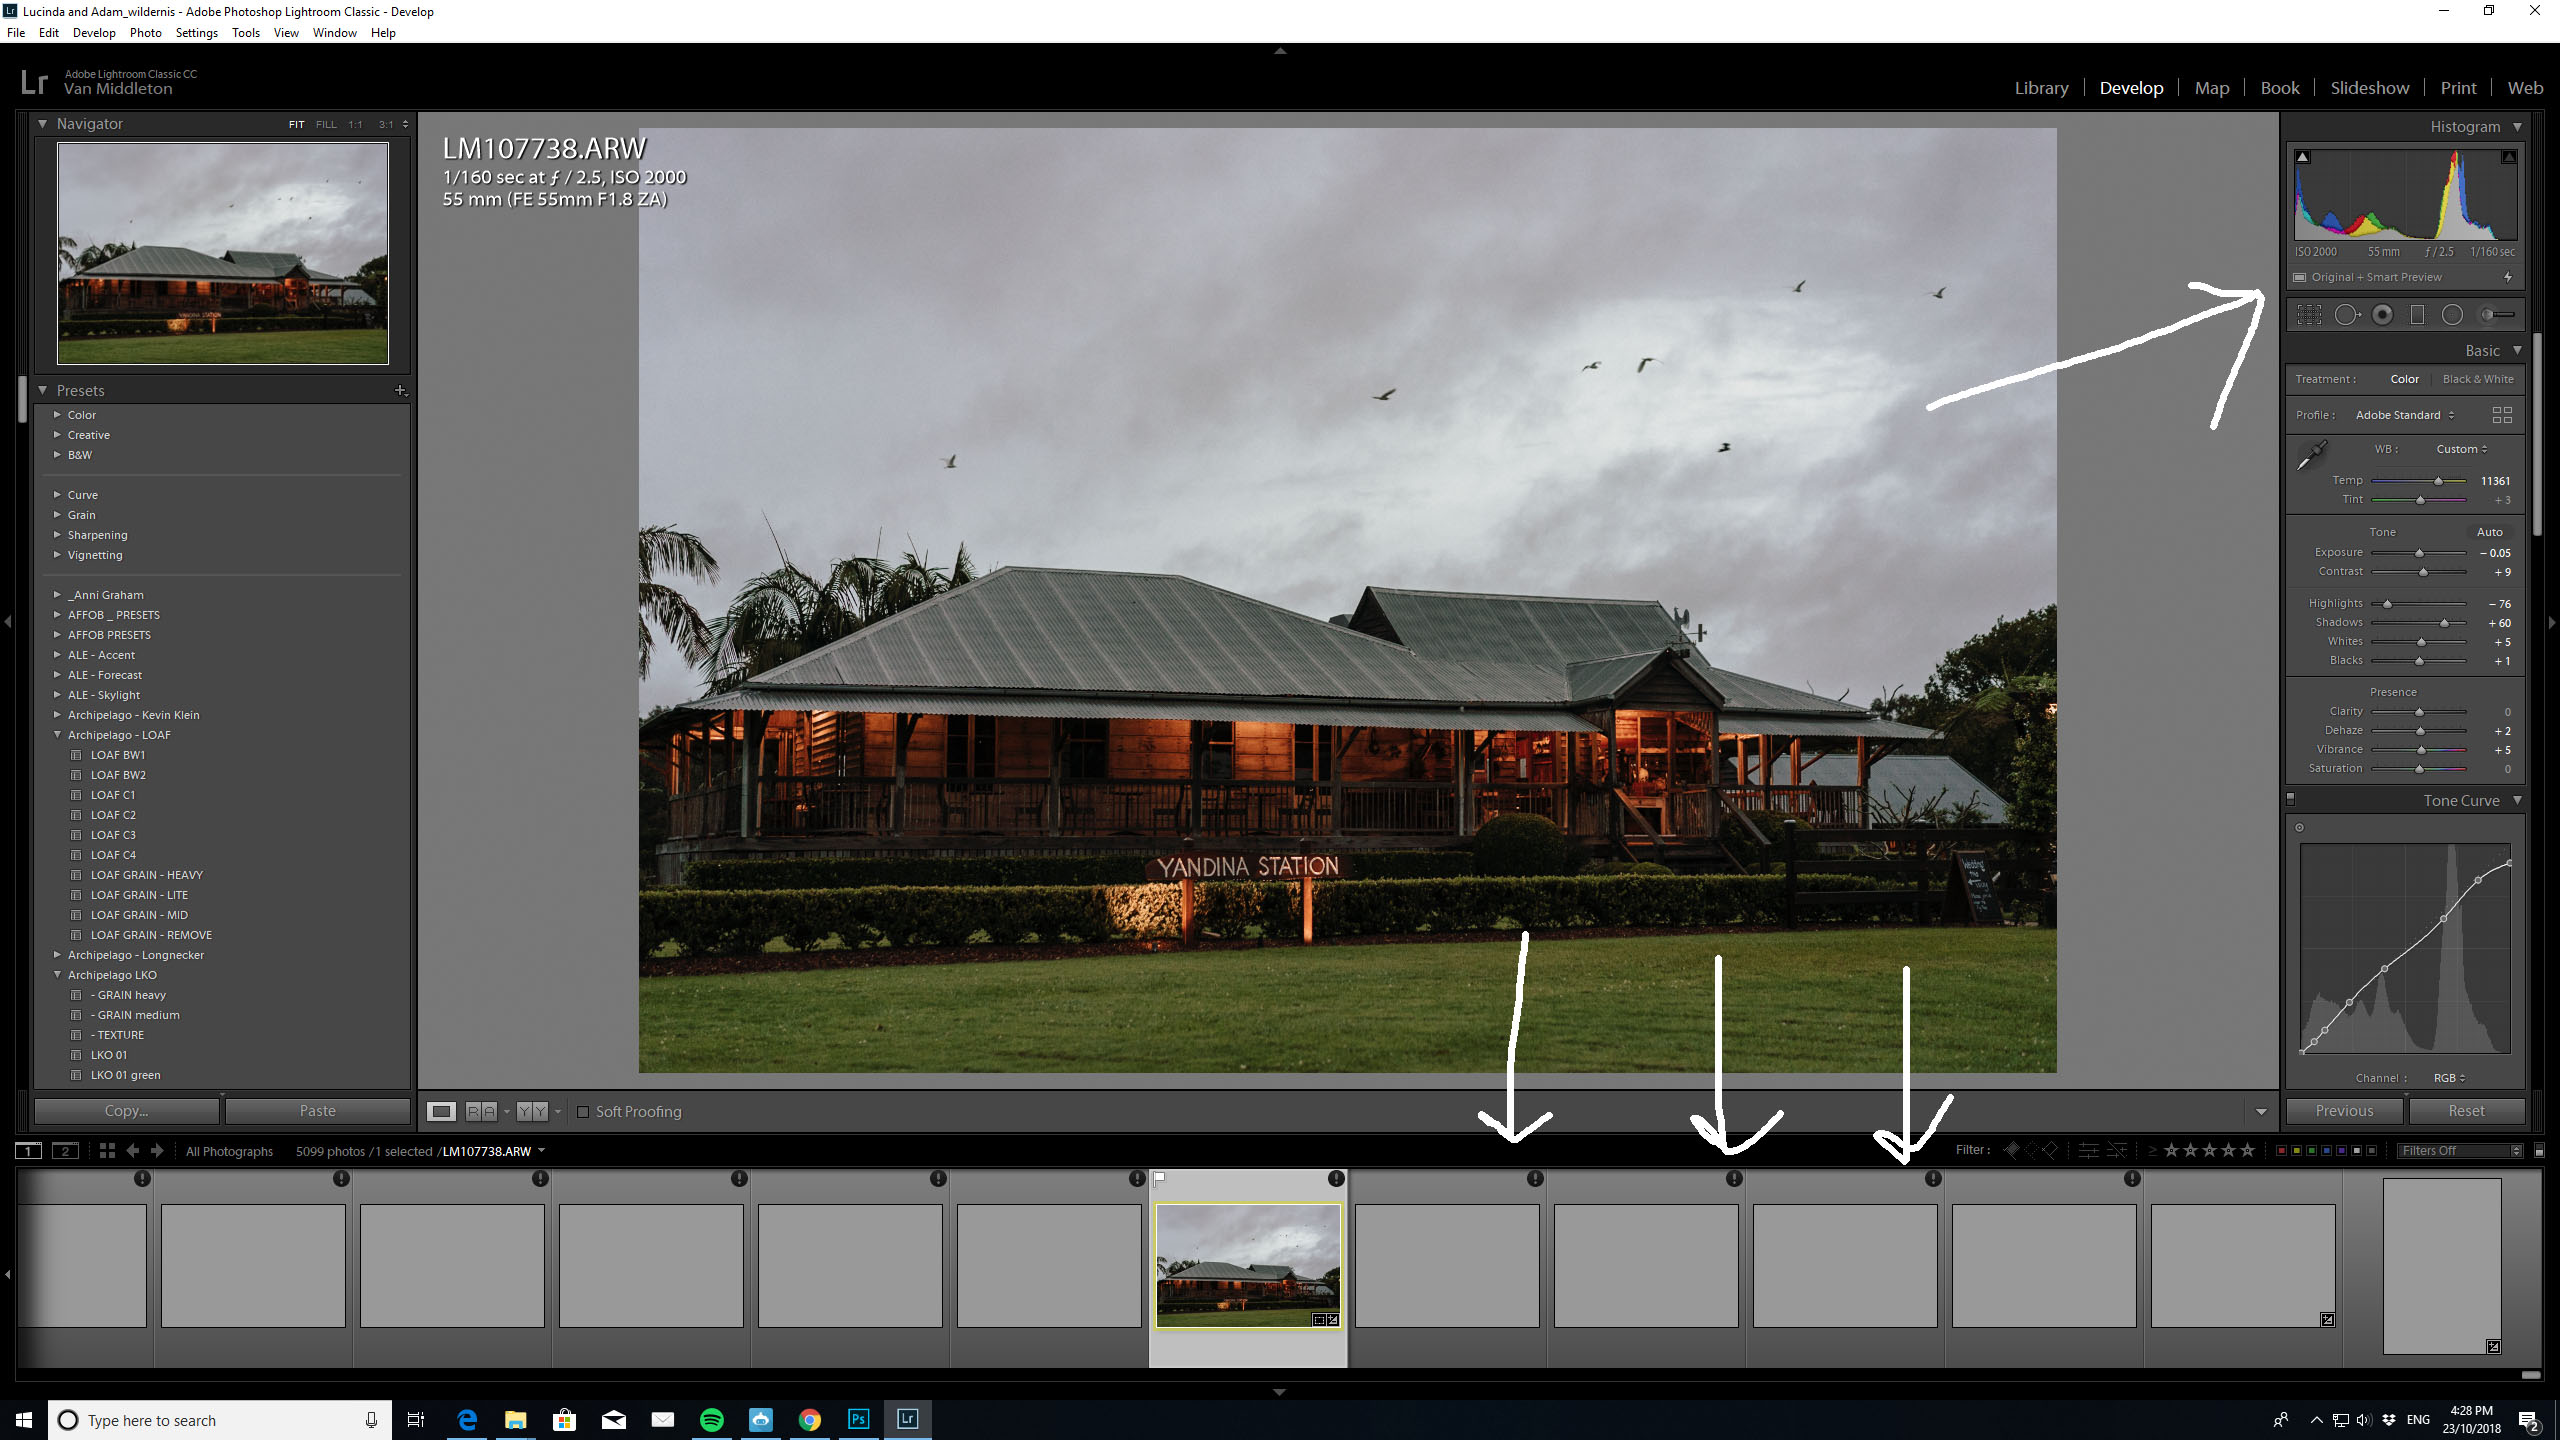 "Lightroom has encountered problems reading this p... Adobe Community